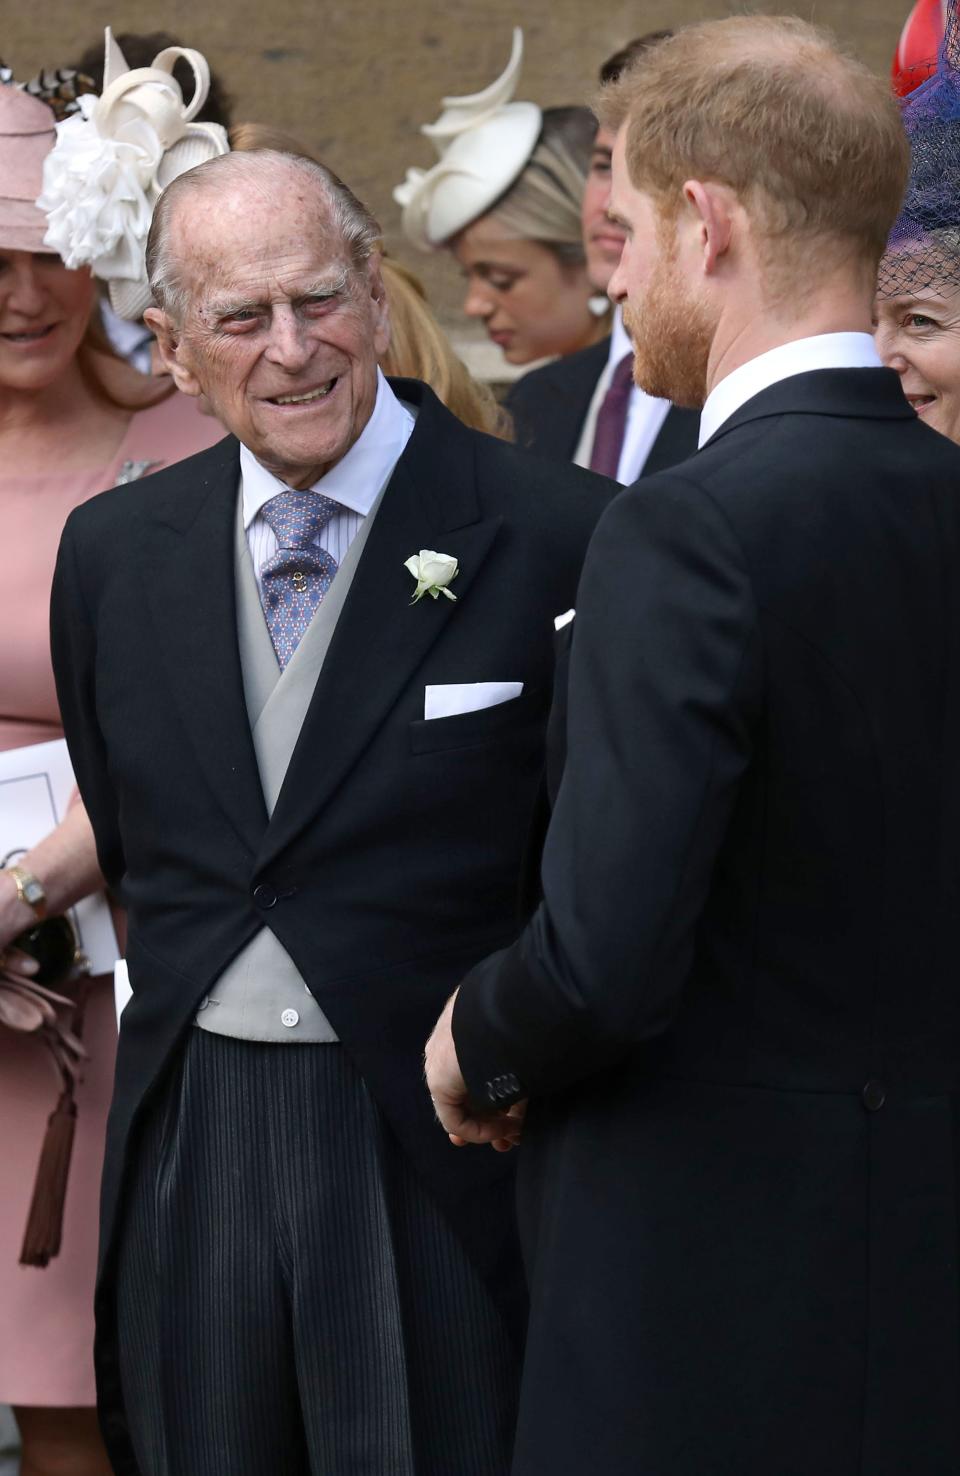 Britain's Prince Philip, Duke of Edinburgh reacts as he talks with Britain's Prince Harry, Duke of Sussex as they leave St George's Chapel in Windsor Castle, Windsor, west of London, on May 18, 2019, after the wedding of Lady Gabriella Windsor and Thomas Kingston. - Lady Gabriella, is the daughter of Prince and Princess Michael of Kent. Prince Michael, is the Queen Elizabeth II's cousin. (Photo by Steve Parsons / POOL / AFP)        (Photo credit should read STEVE PARSONS/AFP/Getty Images)